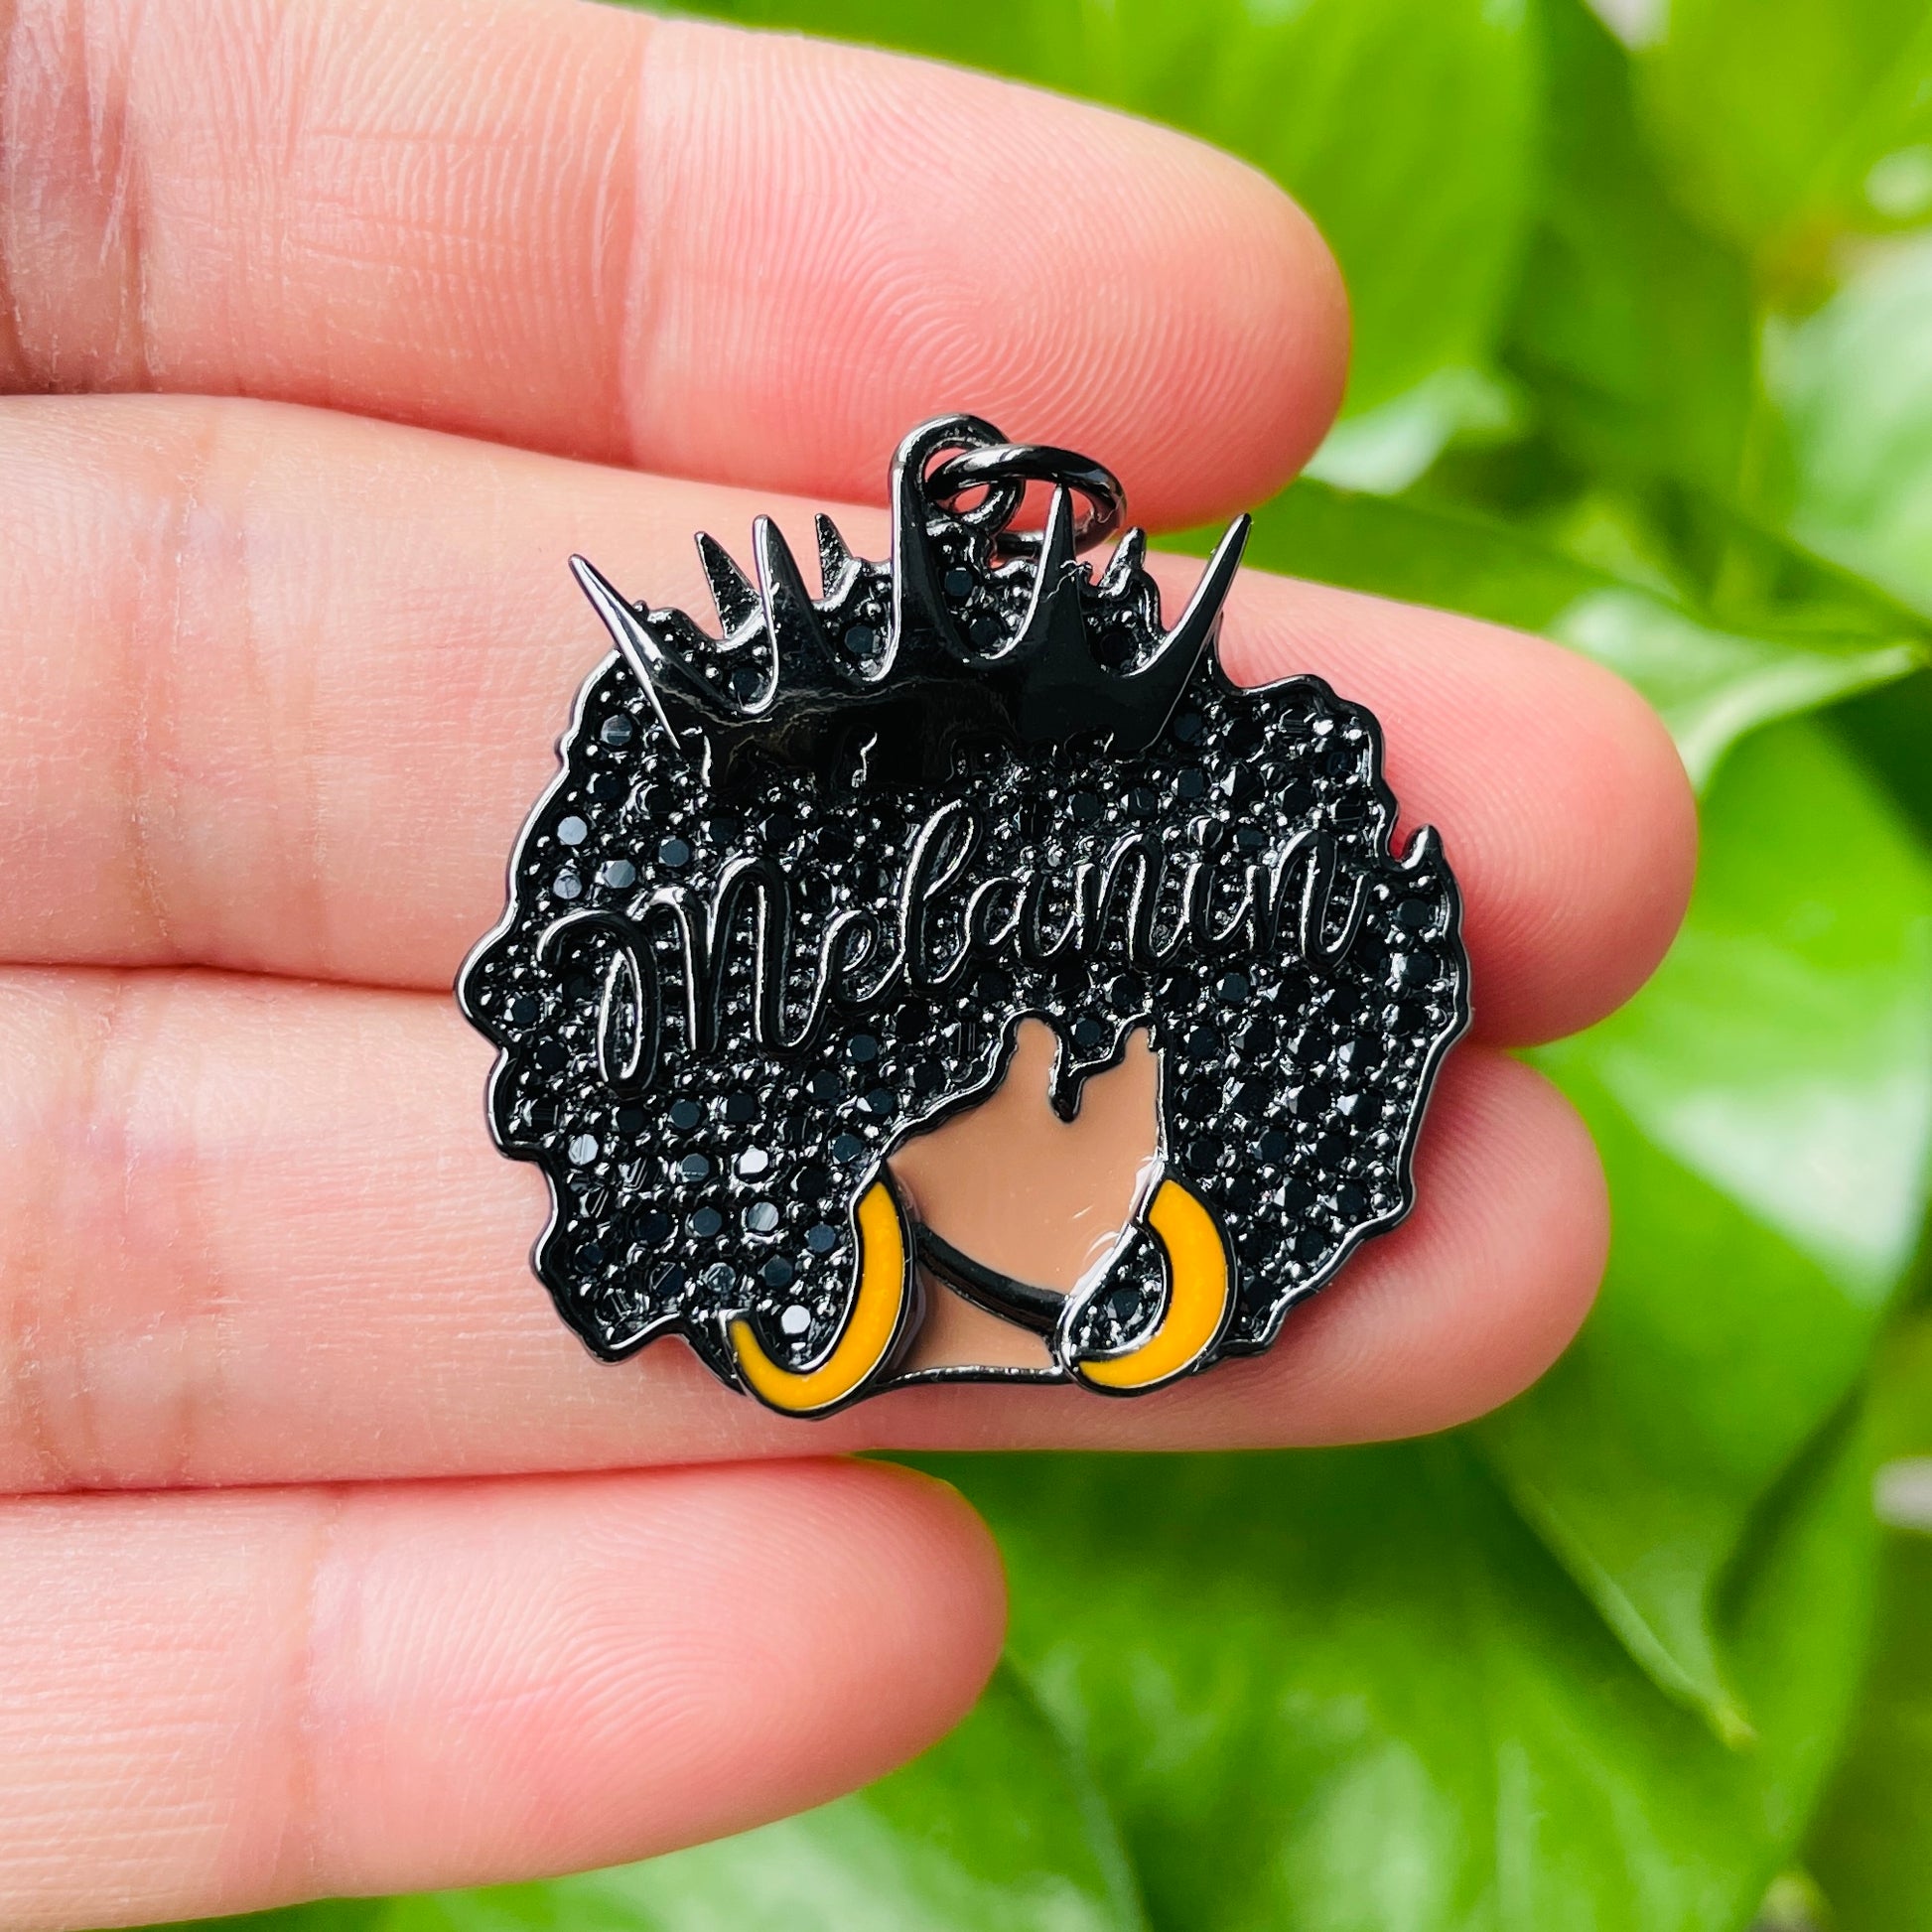 10pcs/lot 29*29mm CZ Paved Crown Queen Melanin Afro Girl Charms Black on Black CZ Paved Charms Afro Girl/Queen Charms Charms Beads Beyond